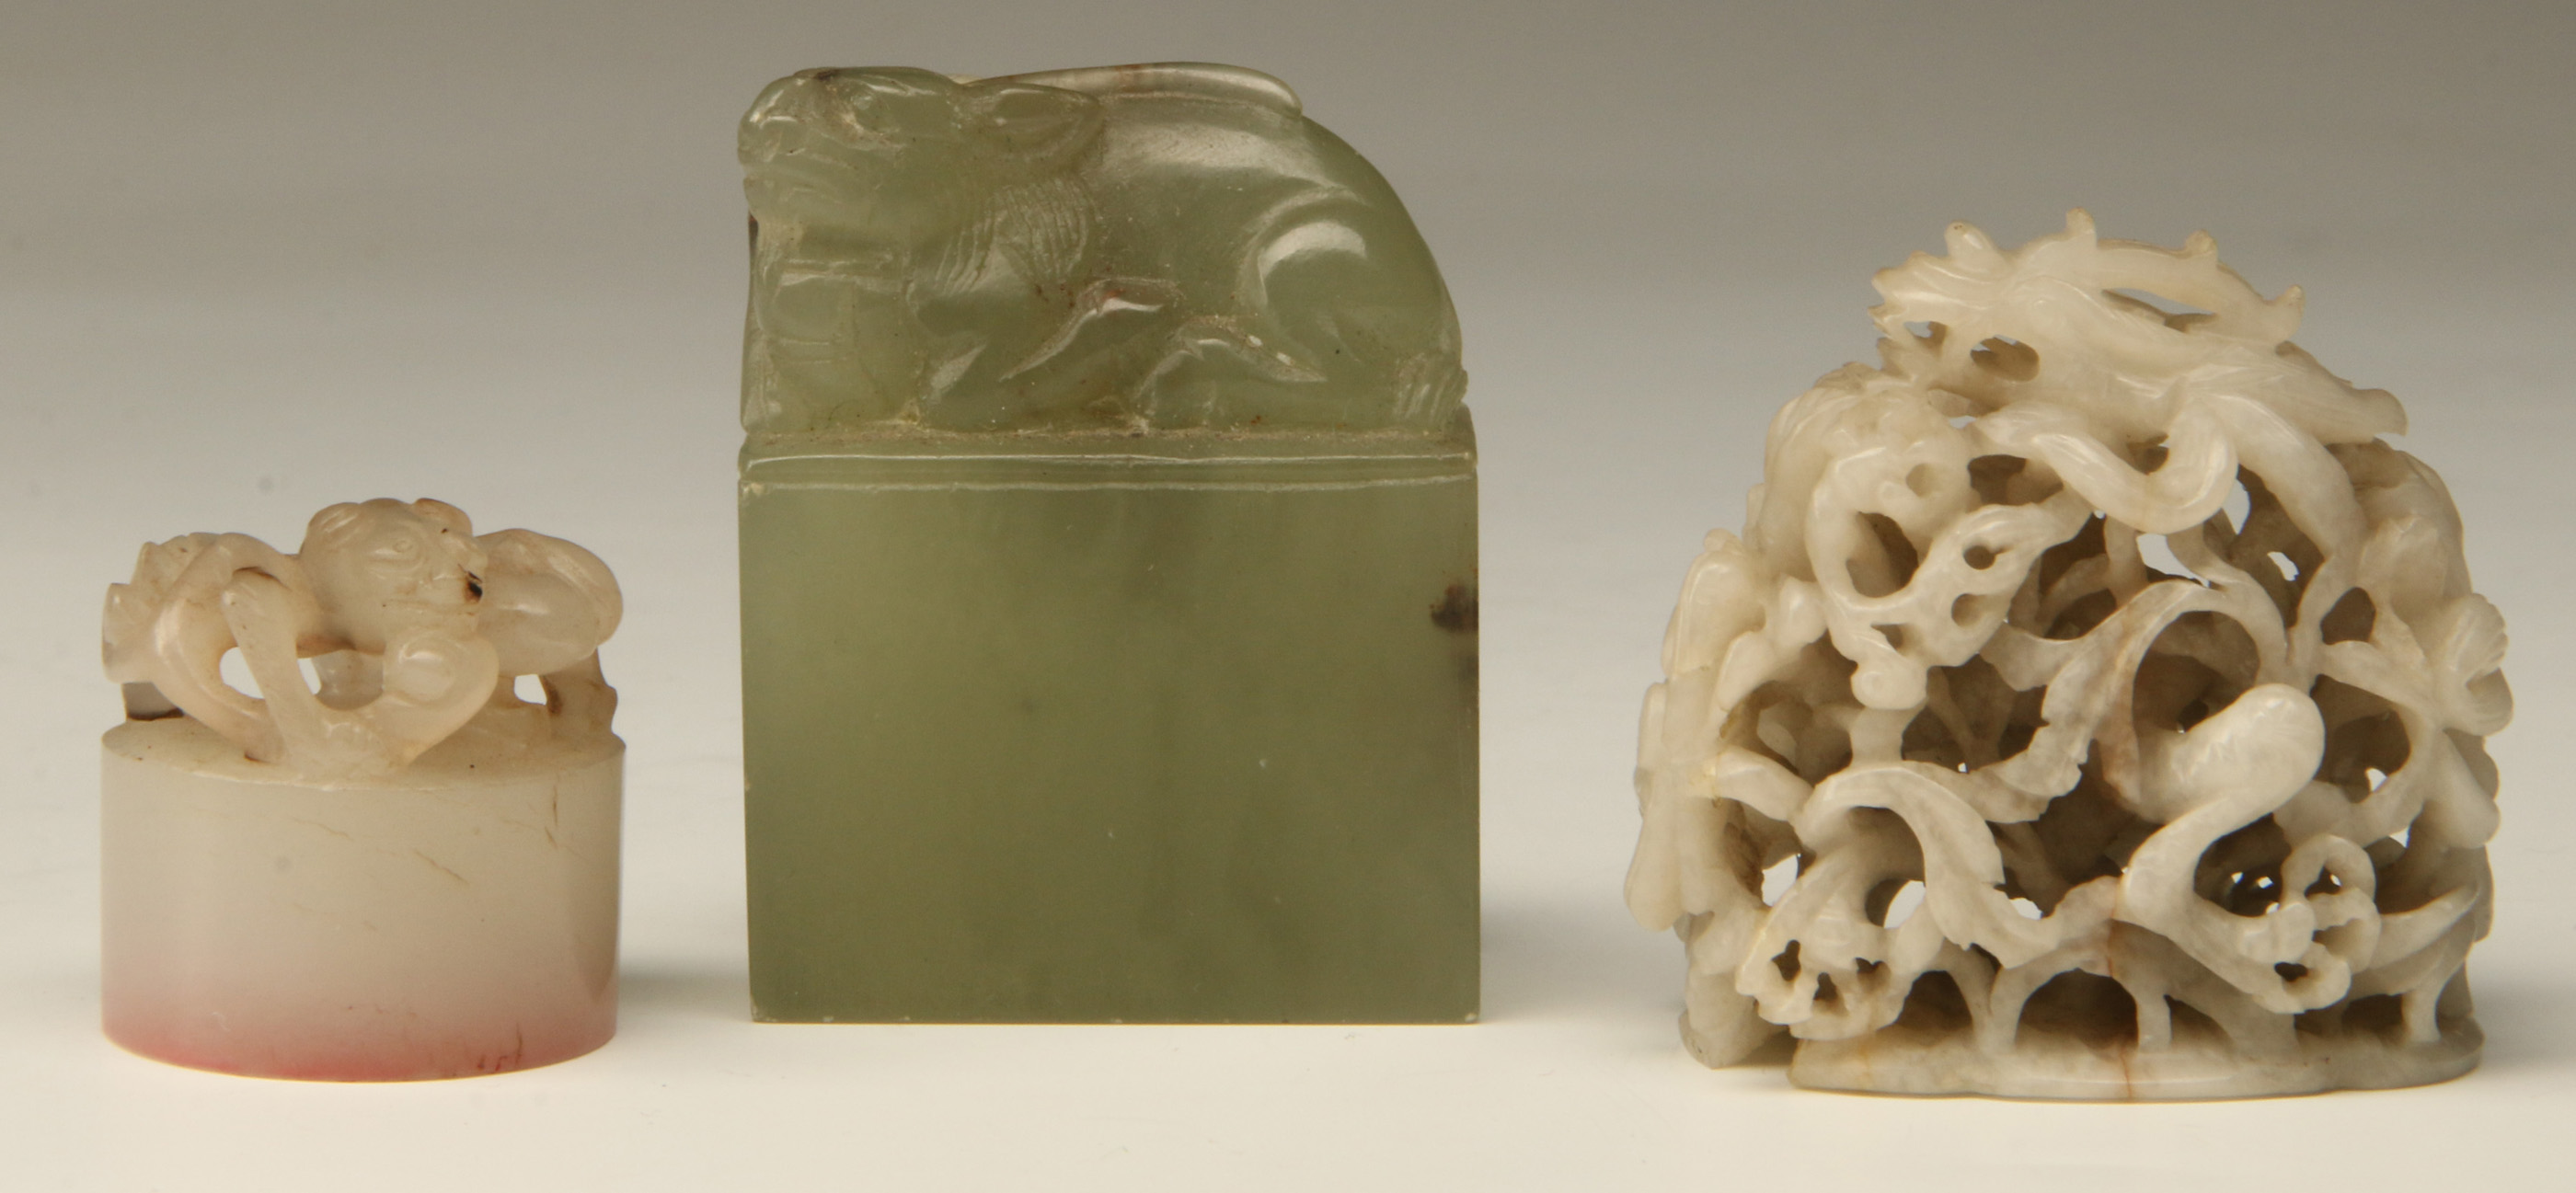 THREE SMALL ANTIQUE CHINESE CARVED JADE OBJECTS